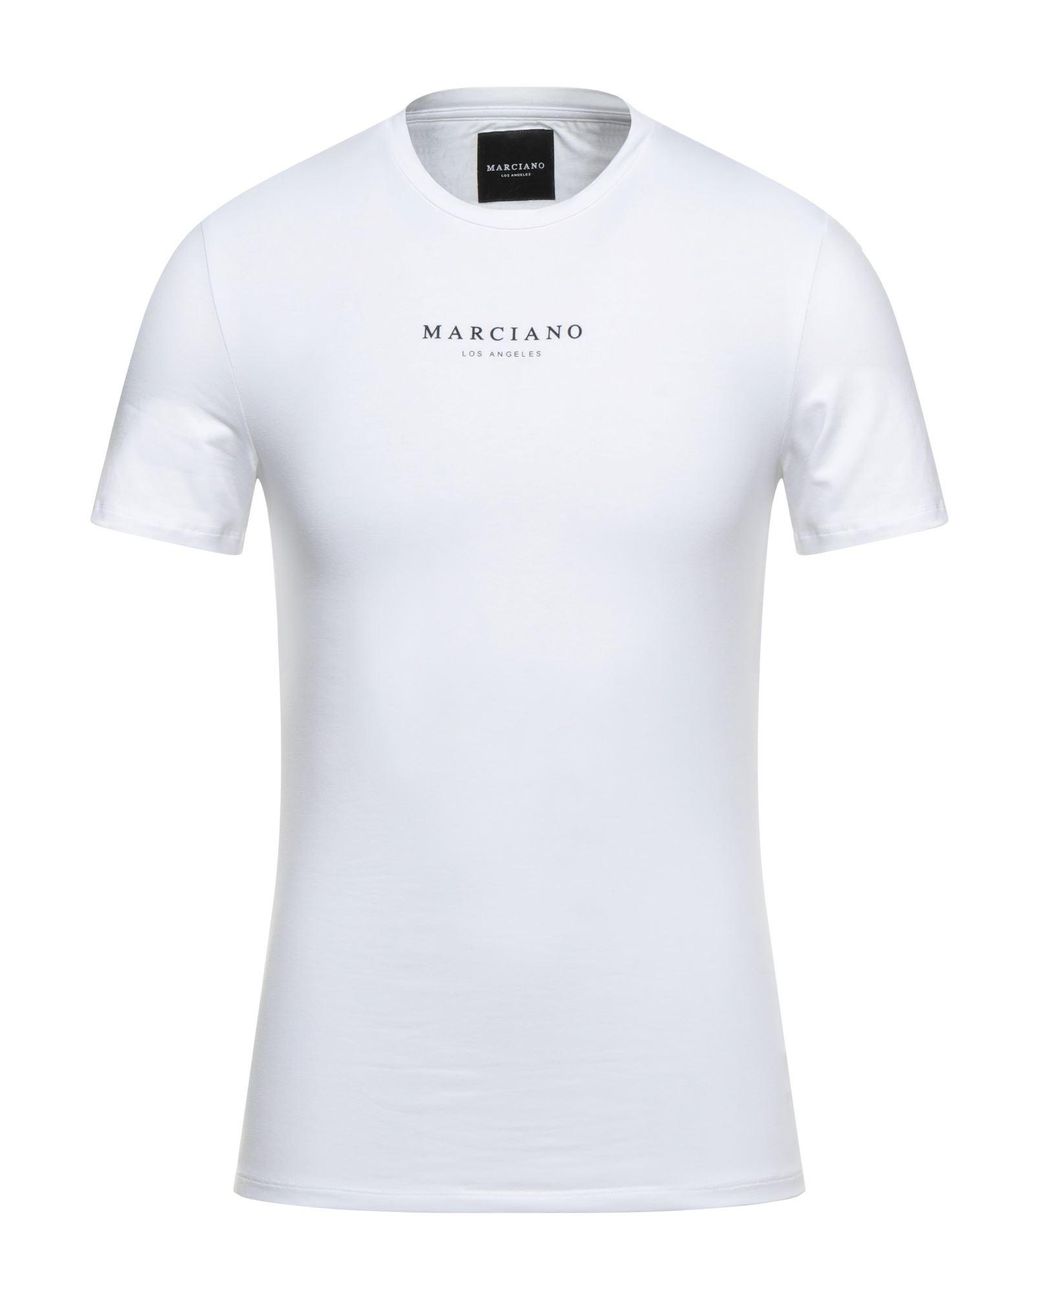 Marciano T-shirt in White for Men - Lyst